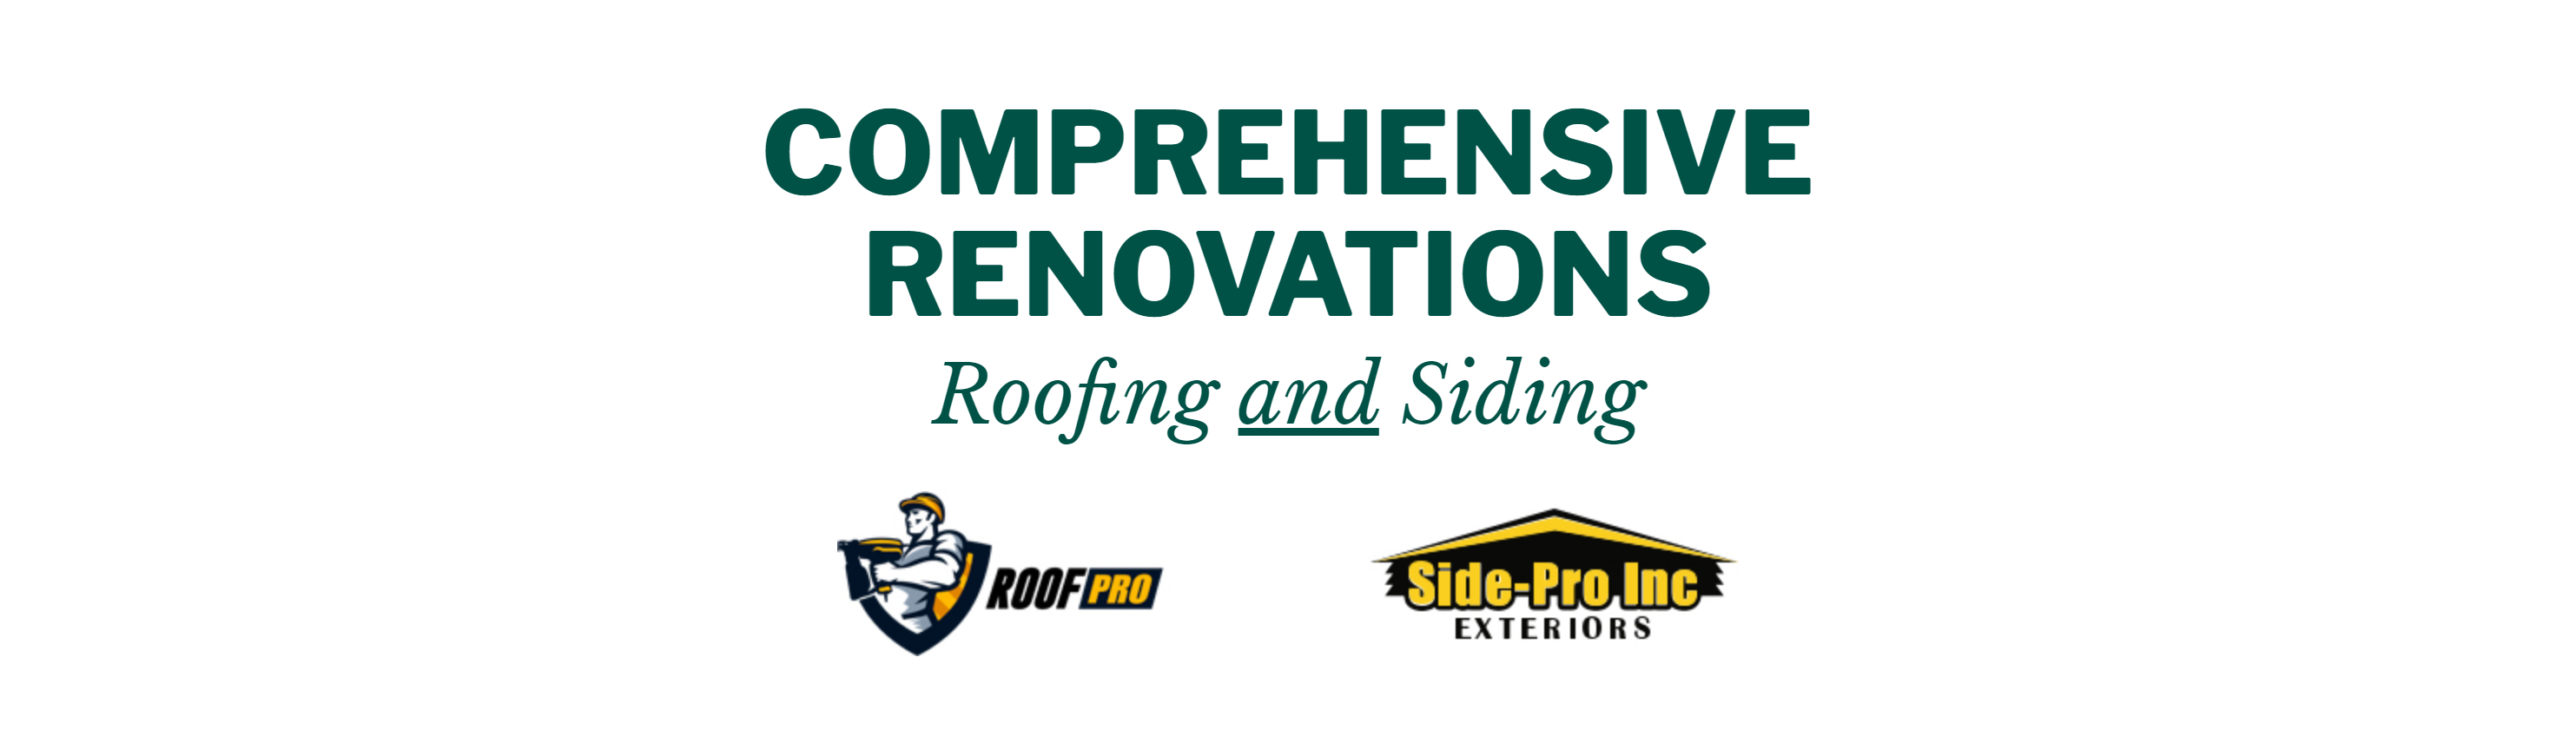 Replace Roofing and Siding - Seattle-Tacoma - Roof Pro, Inc.